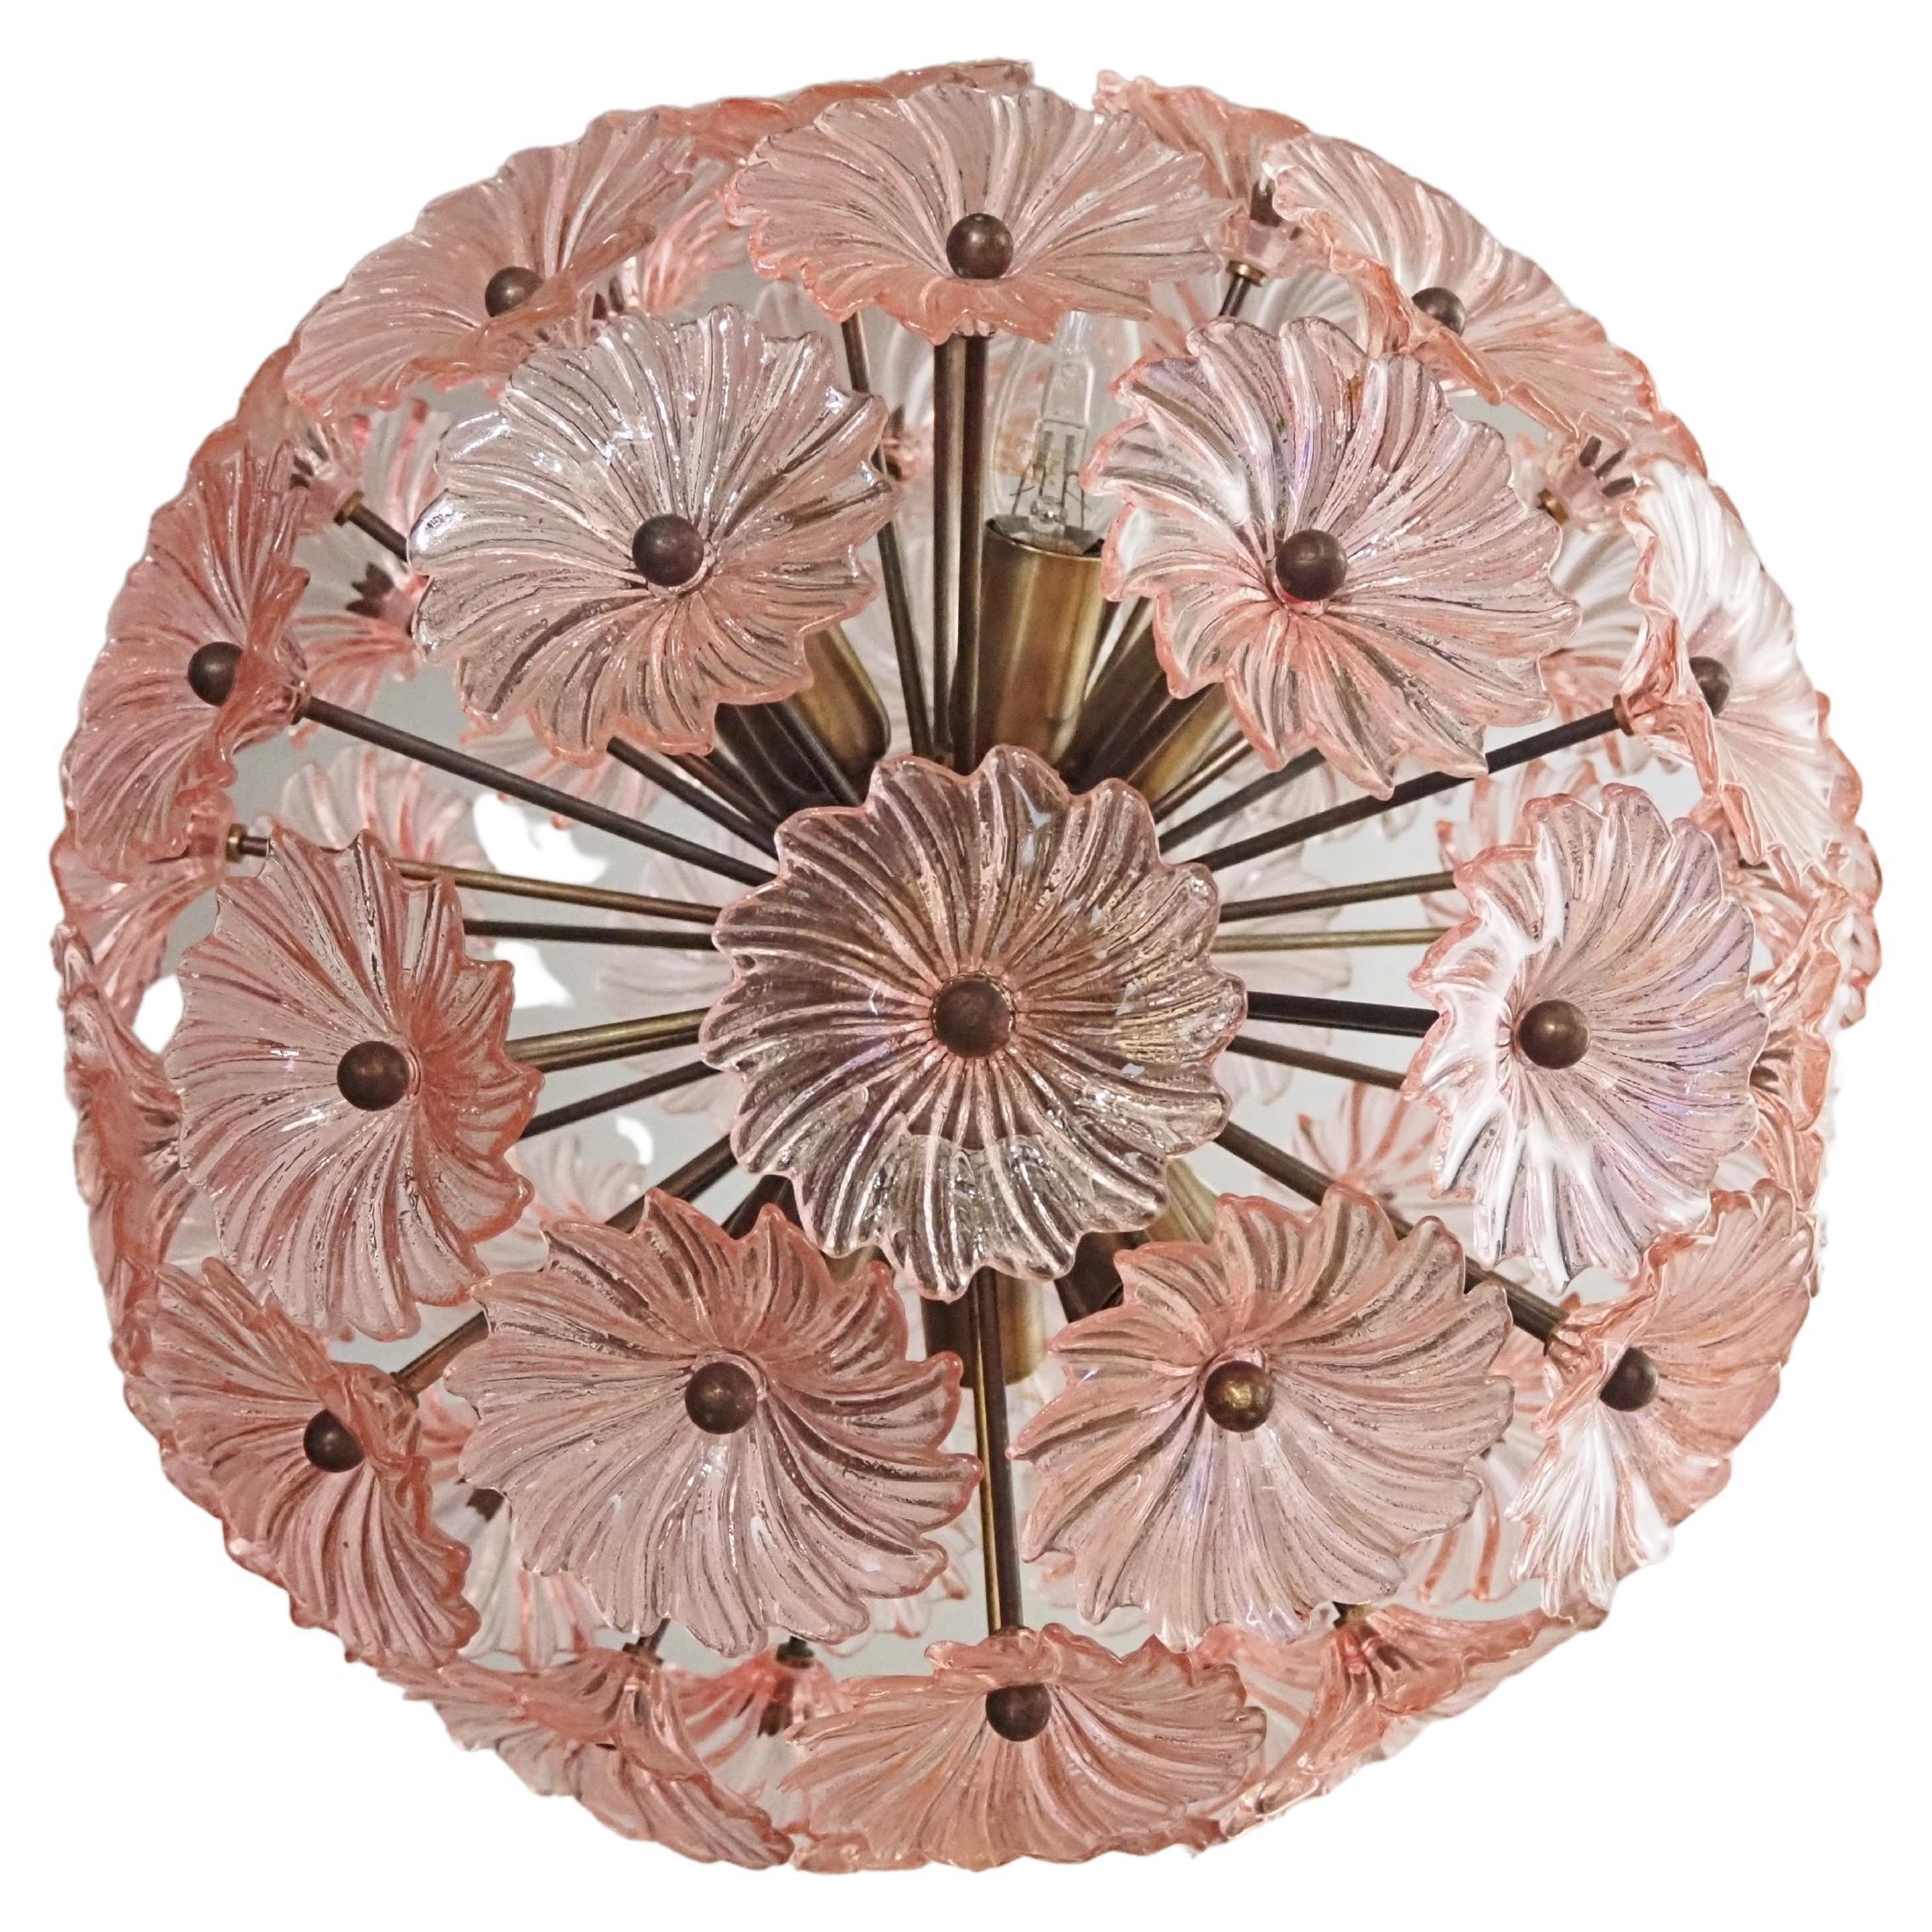 Sputnik space age Italian vintage crystal chandelier made by 51 pink glasses in a burnished brass metal frame. Elegant lighting object.
Period: late 20th century
Dimensions: 39 inches (100 cm) height with chain; 17.70 inches (45 cm) height without